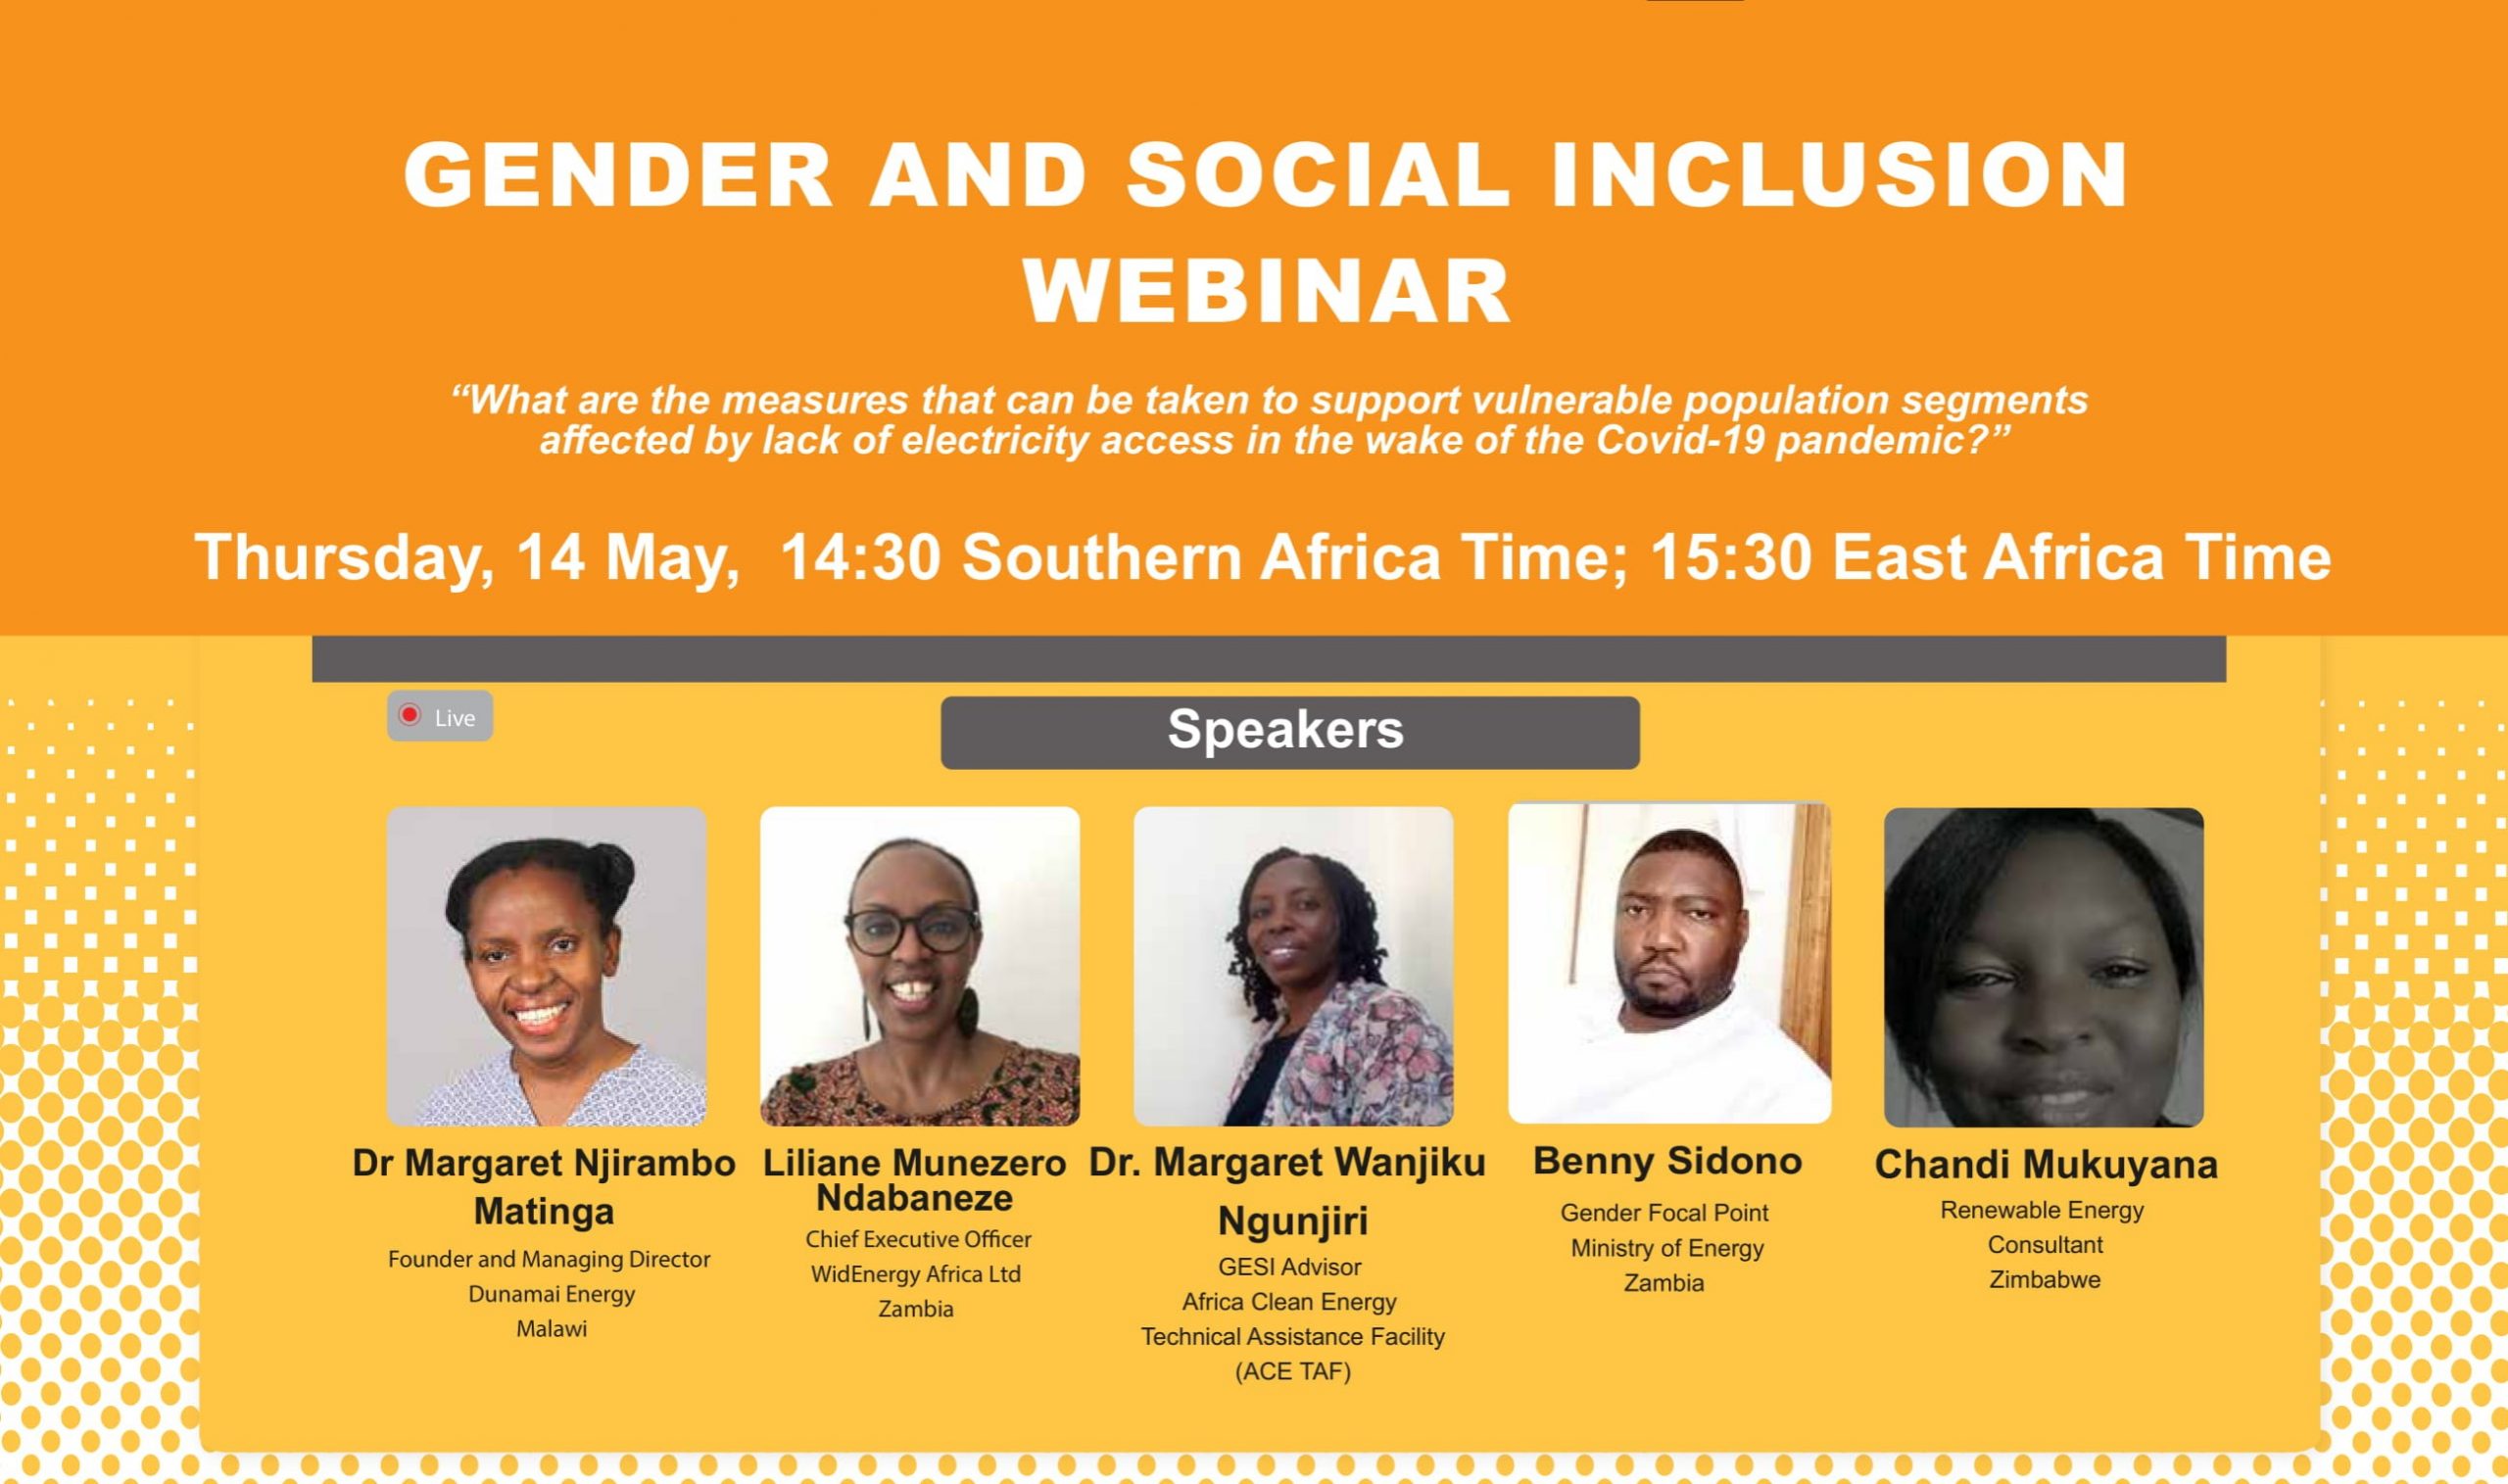 Gender and Social Inclusion (GESI) Webinar: Southern Africa